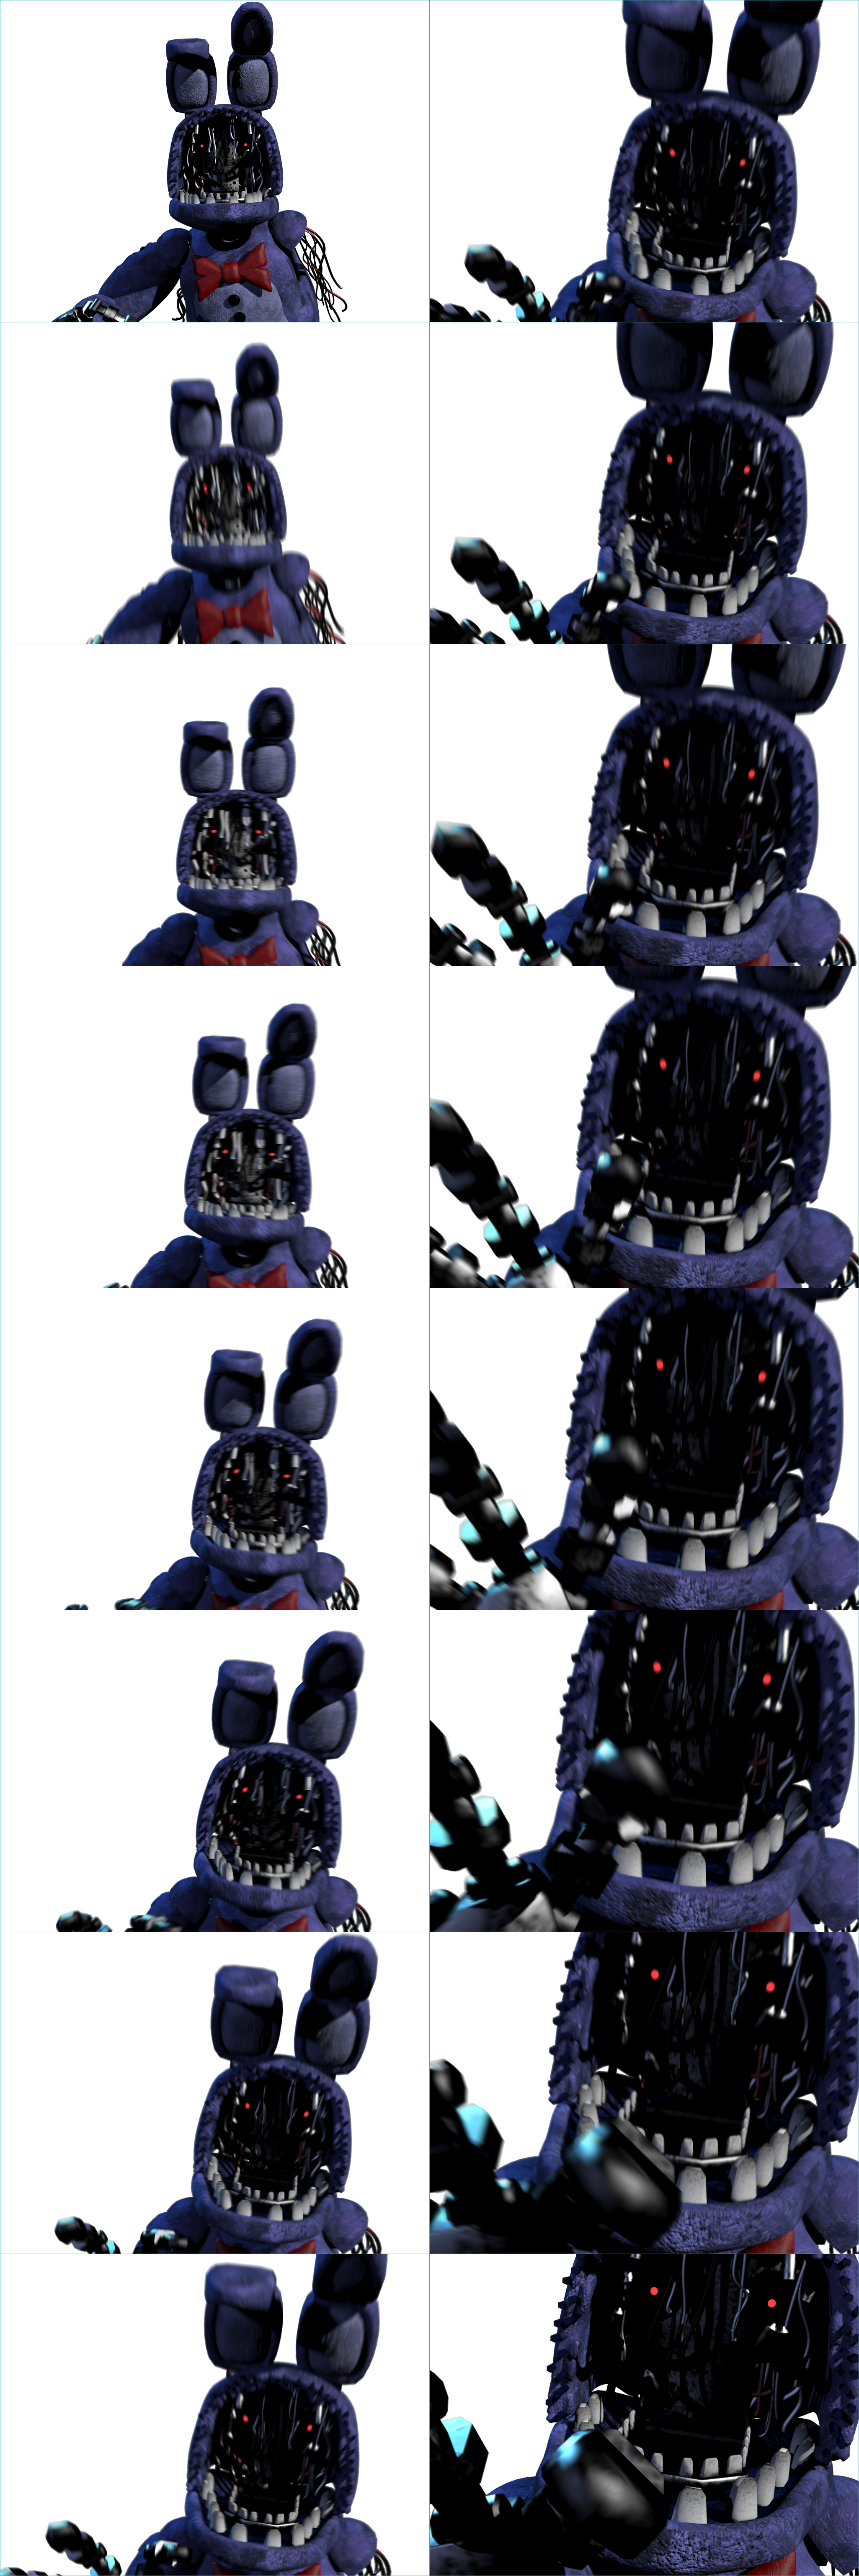 Five Nights at Freddy's 2 - Withered Bonnie